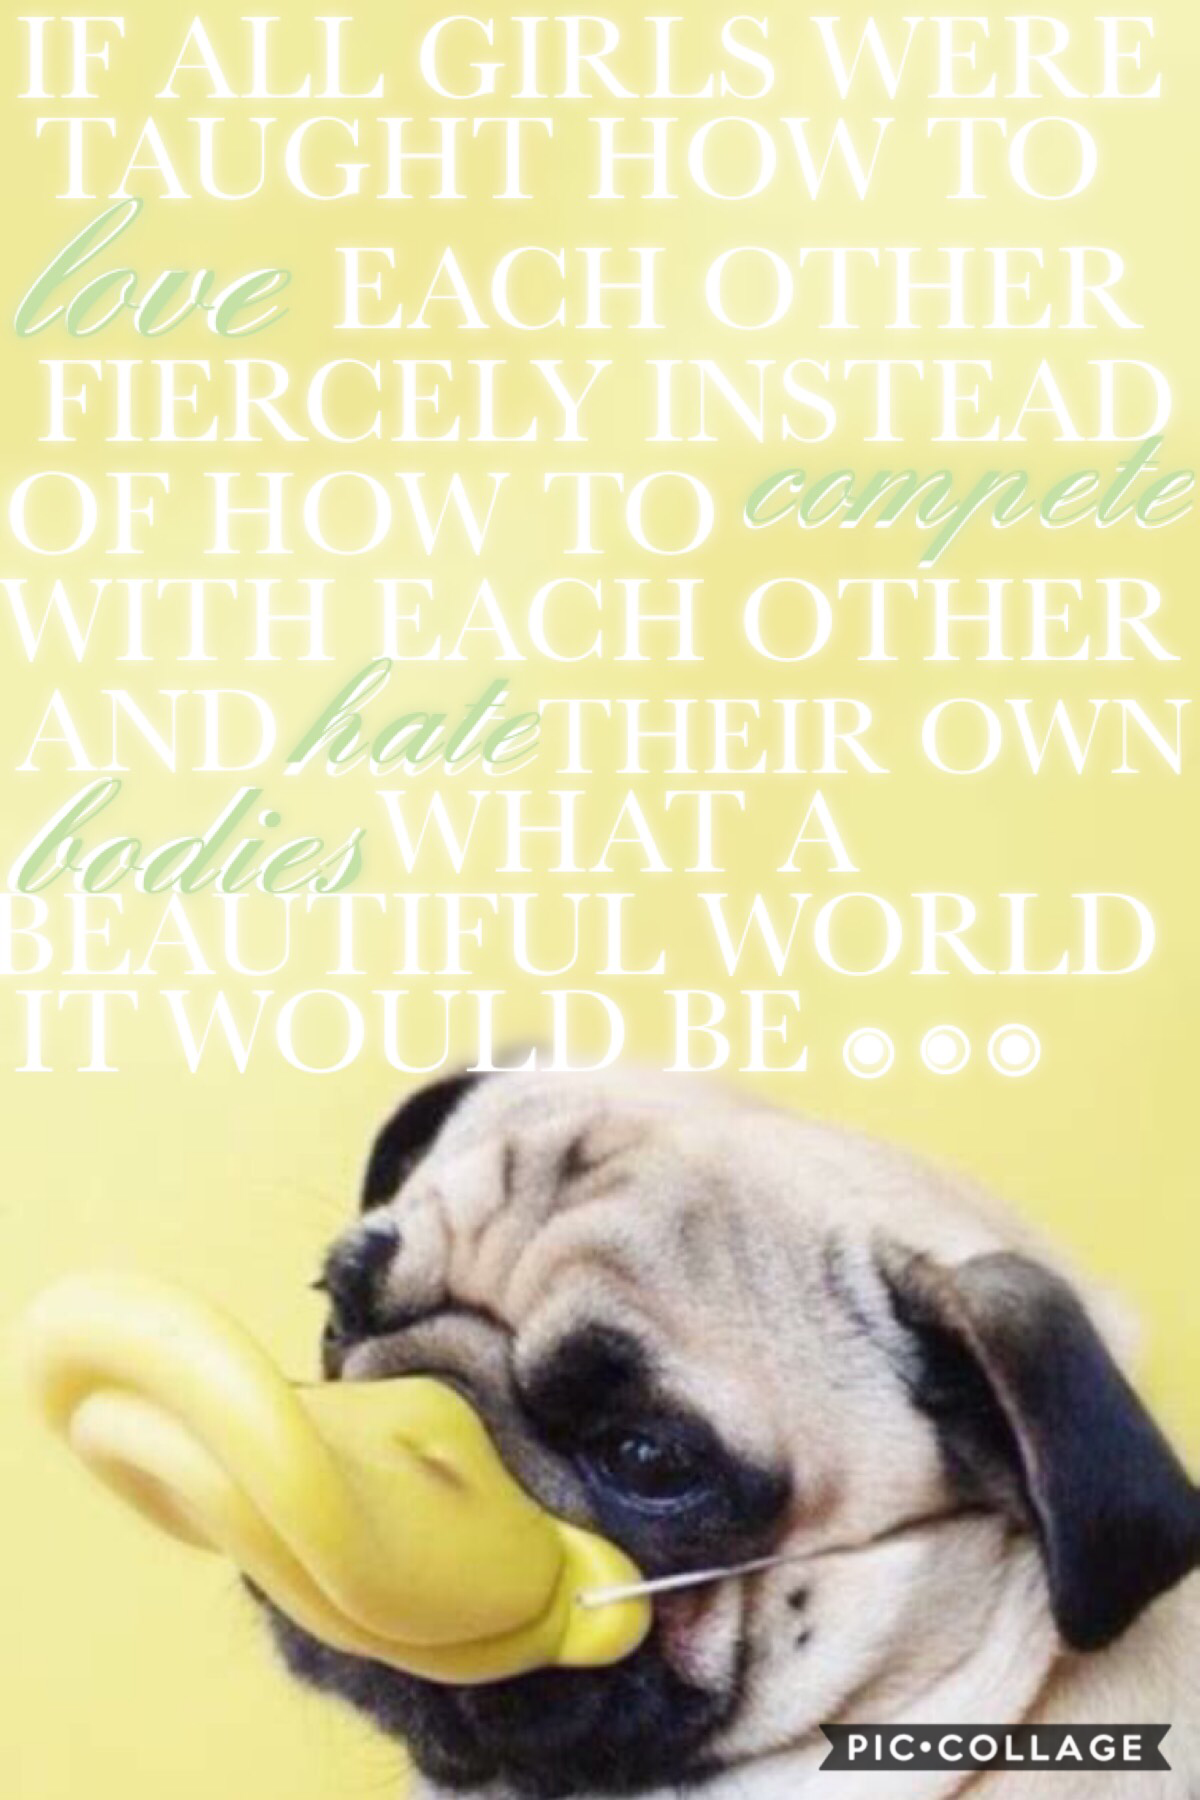 Inspired by the beautiful @abstract!! I love this quote sooo much omg 💗💗 and the pug is adorable !!





